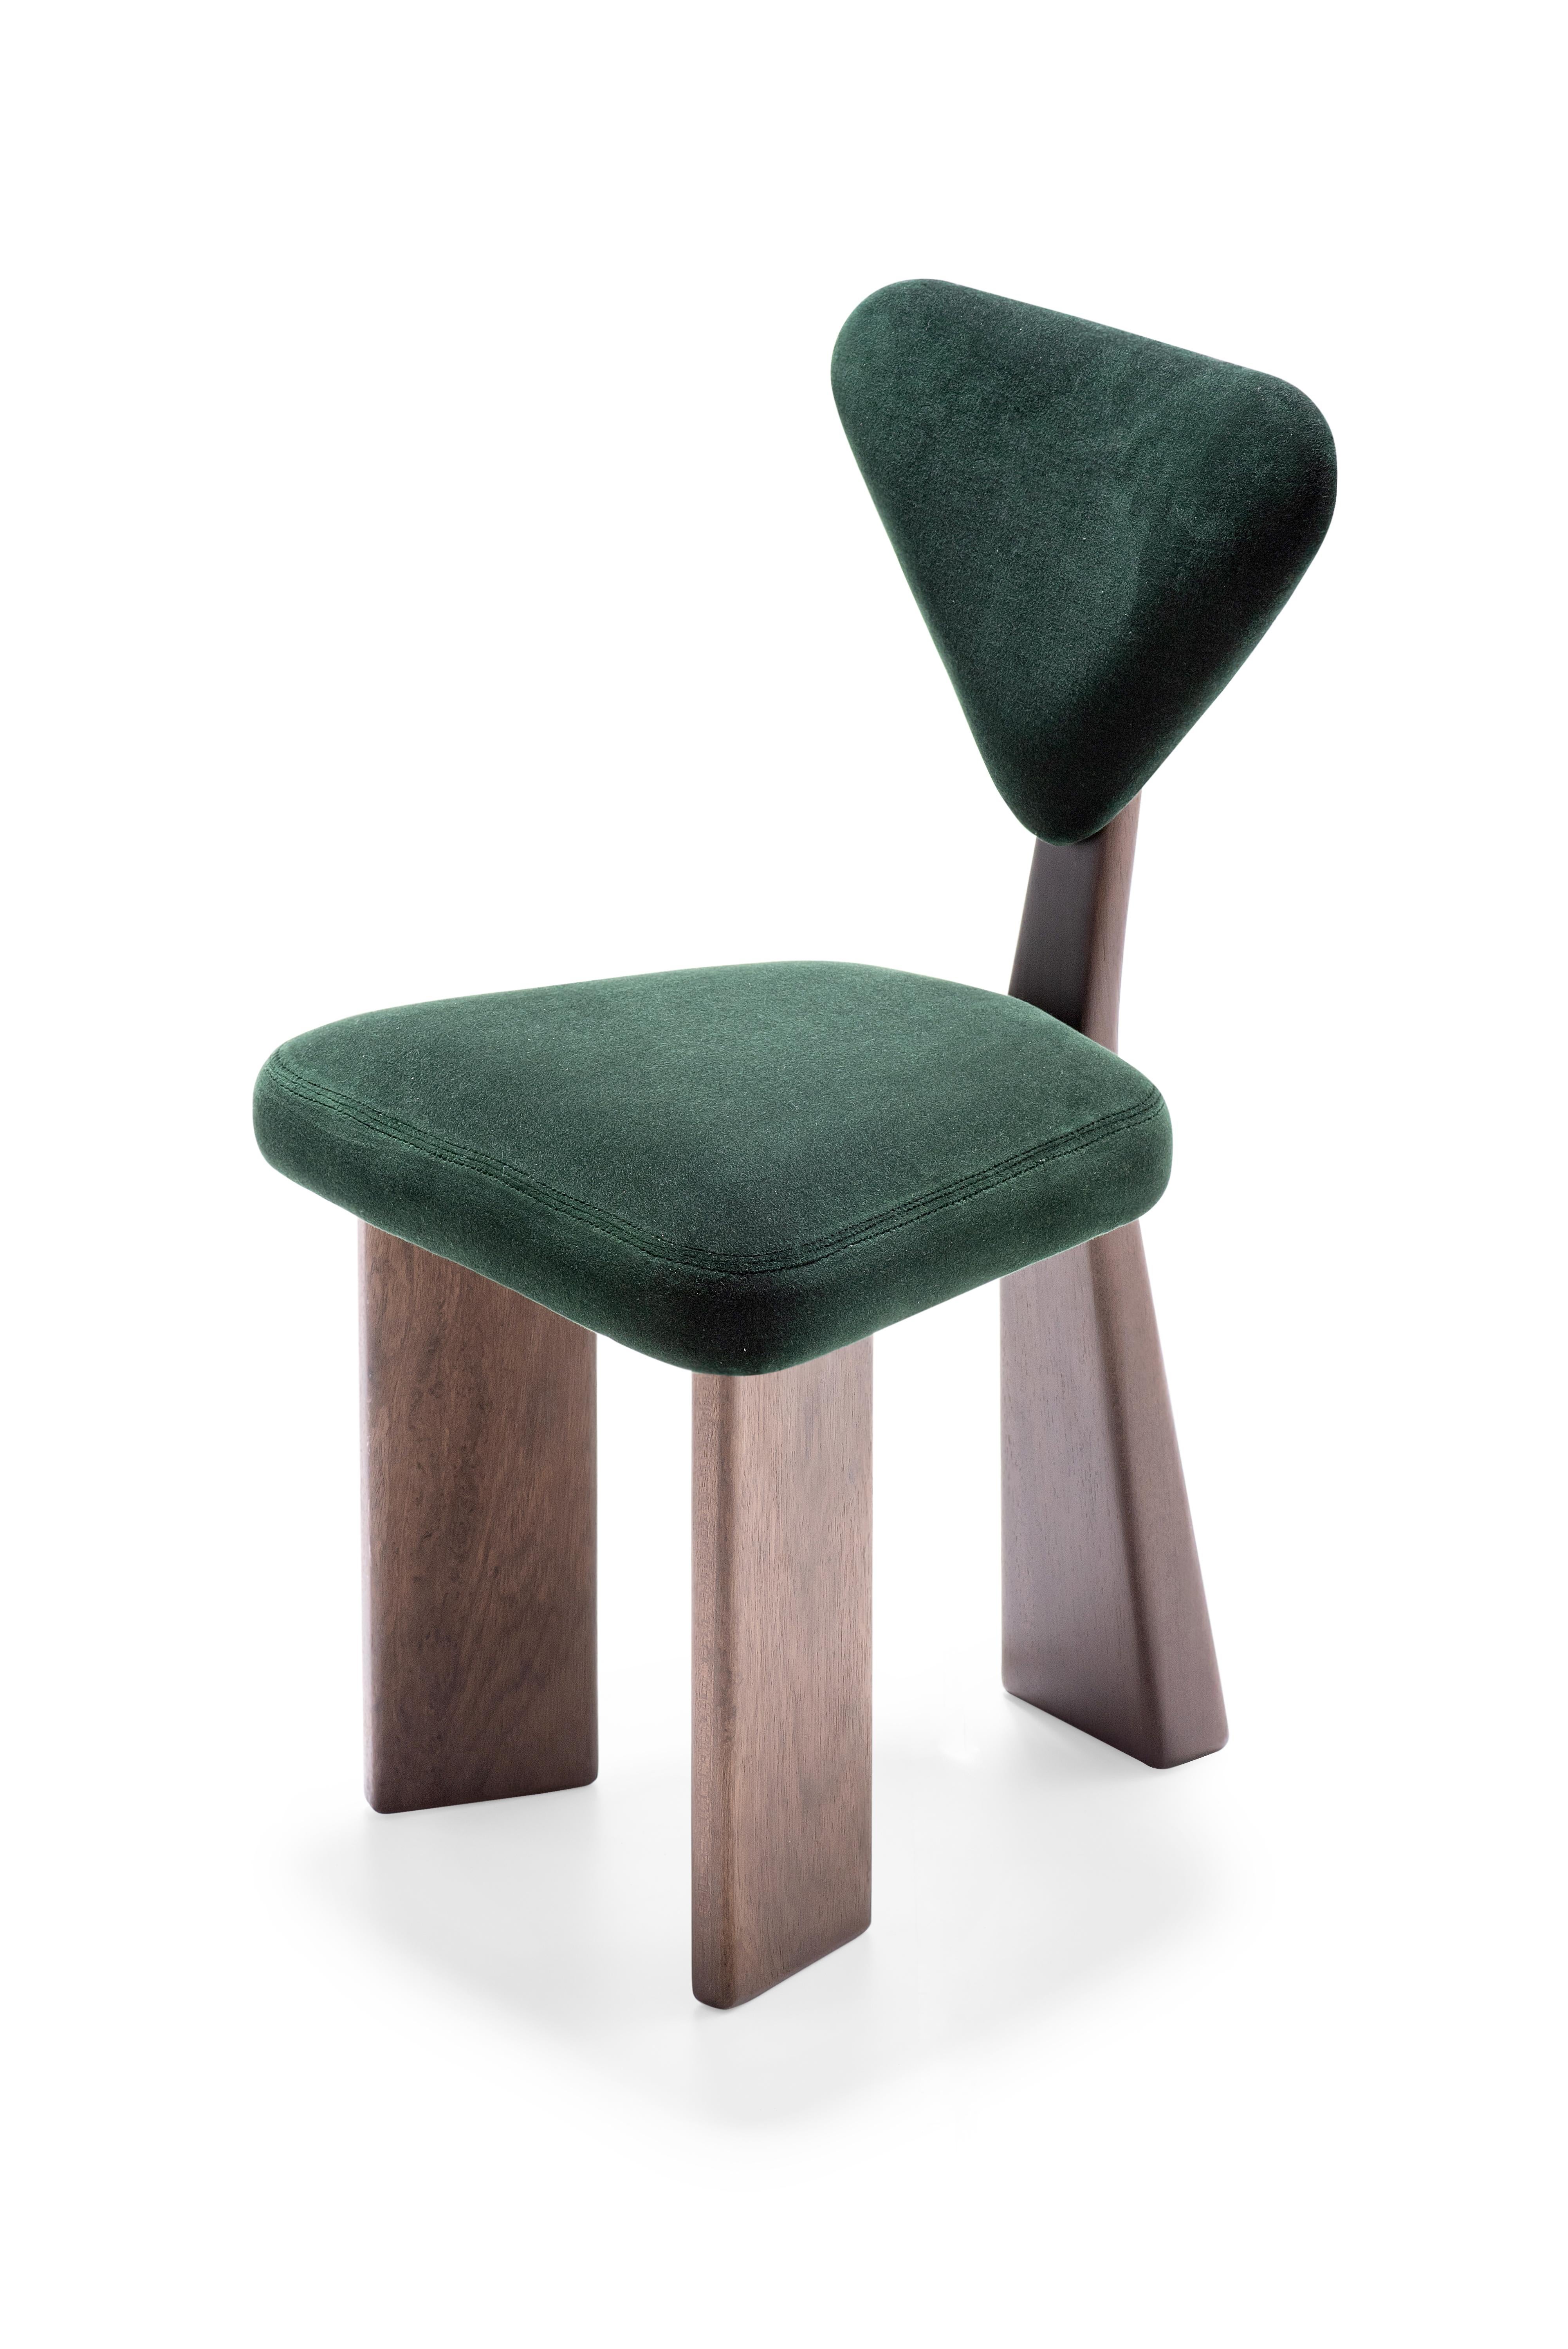 The Giraffe dining chair was designed with soft curves and slender, but with volume, bringing comfort and elegance. The base structure was thought with three feet. The upholstered seat and backrest accompany the language of curves inspired by the